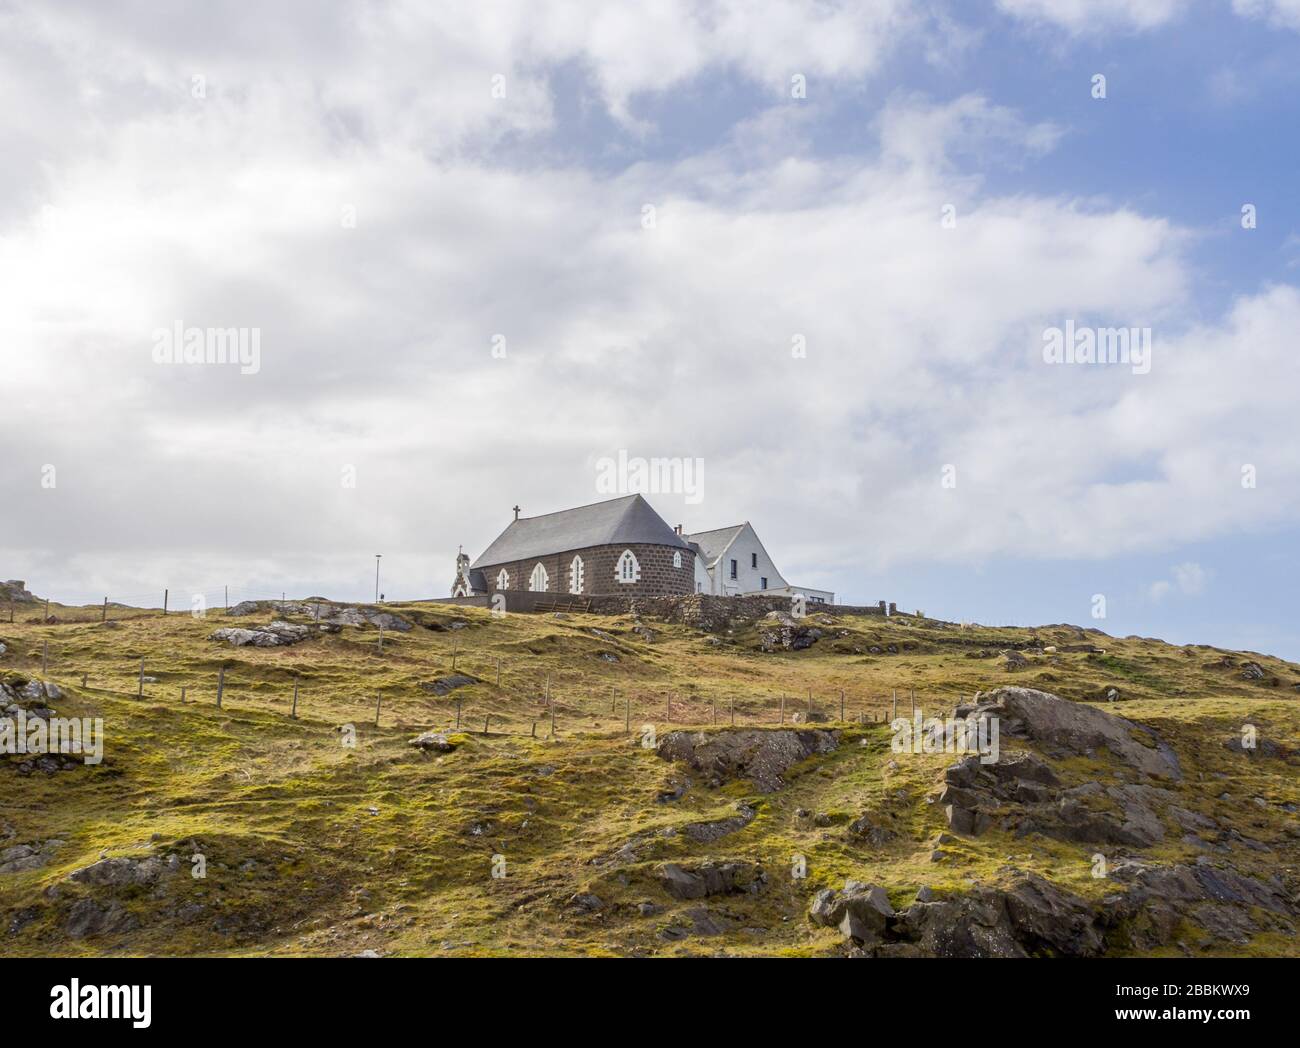 St Michael's RC Church, Isle of Eriskay, Outer Hebrides, Western Isles, Scotland, UK. Church on hill in hebrides Stock Photo